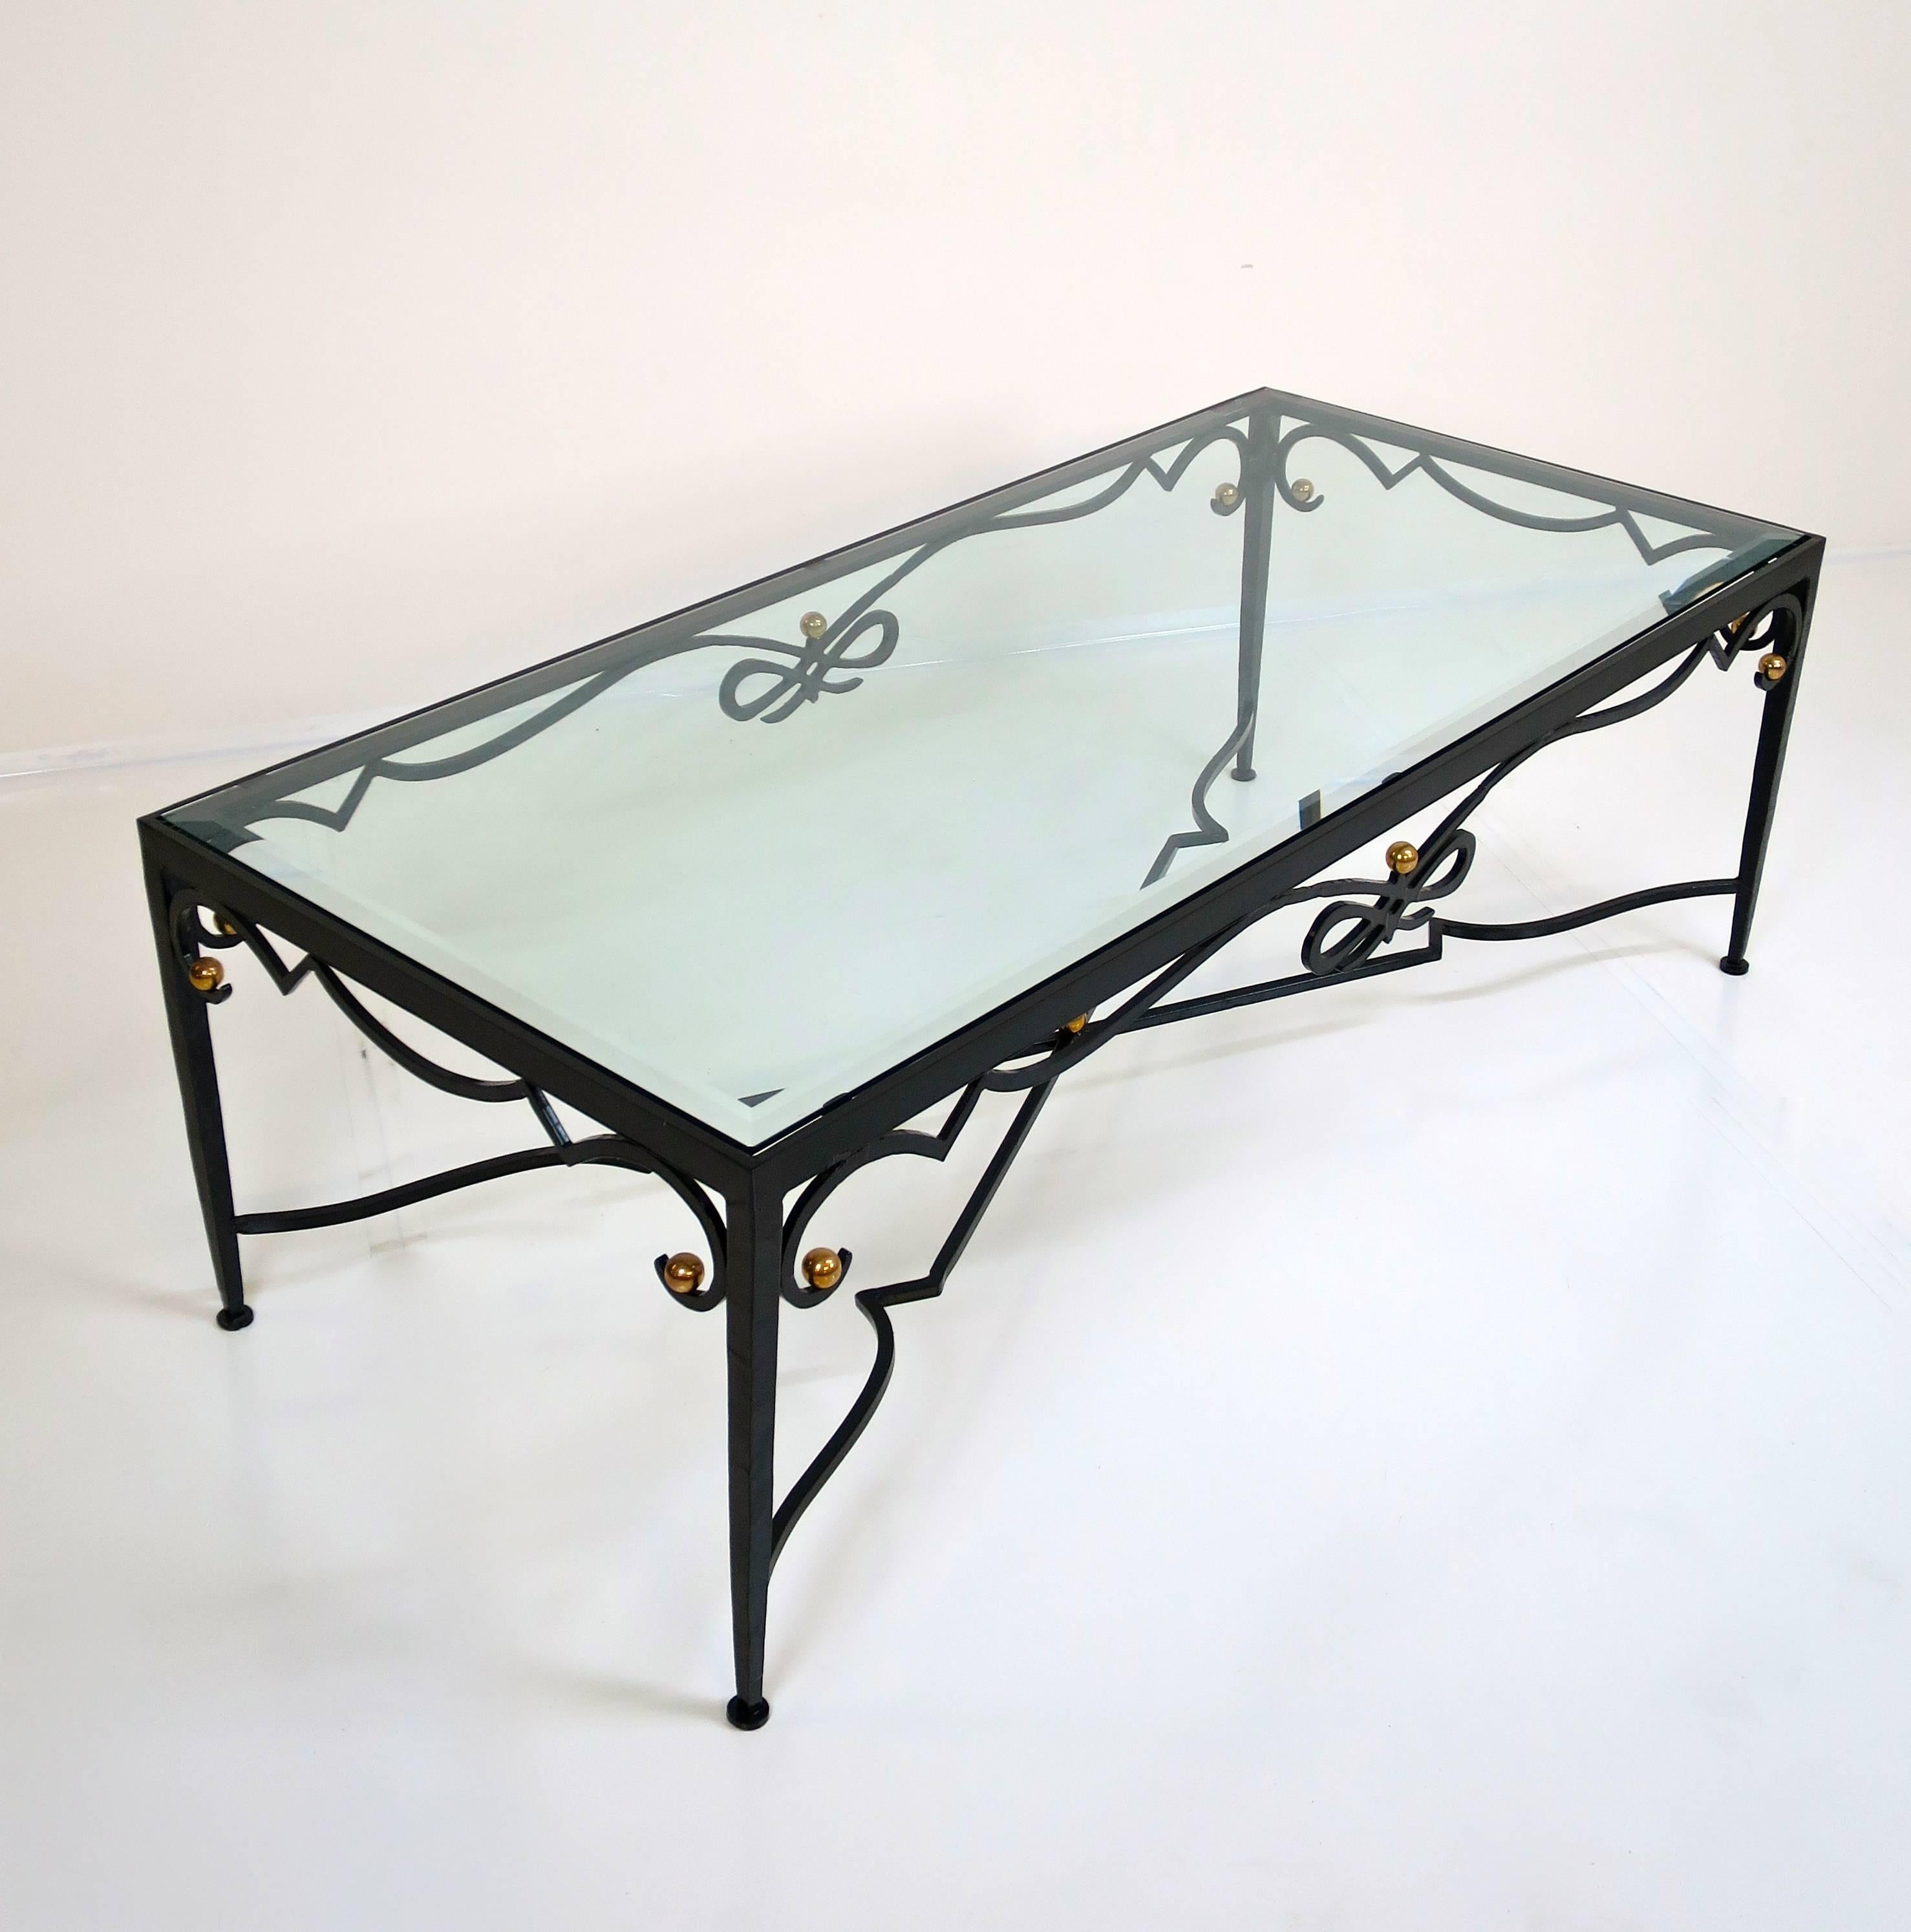 An exceptional French Cocktail table made of forged iron with solid brass details and a beveled glass top, circa 1960's.